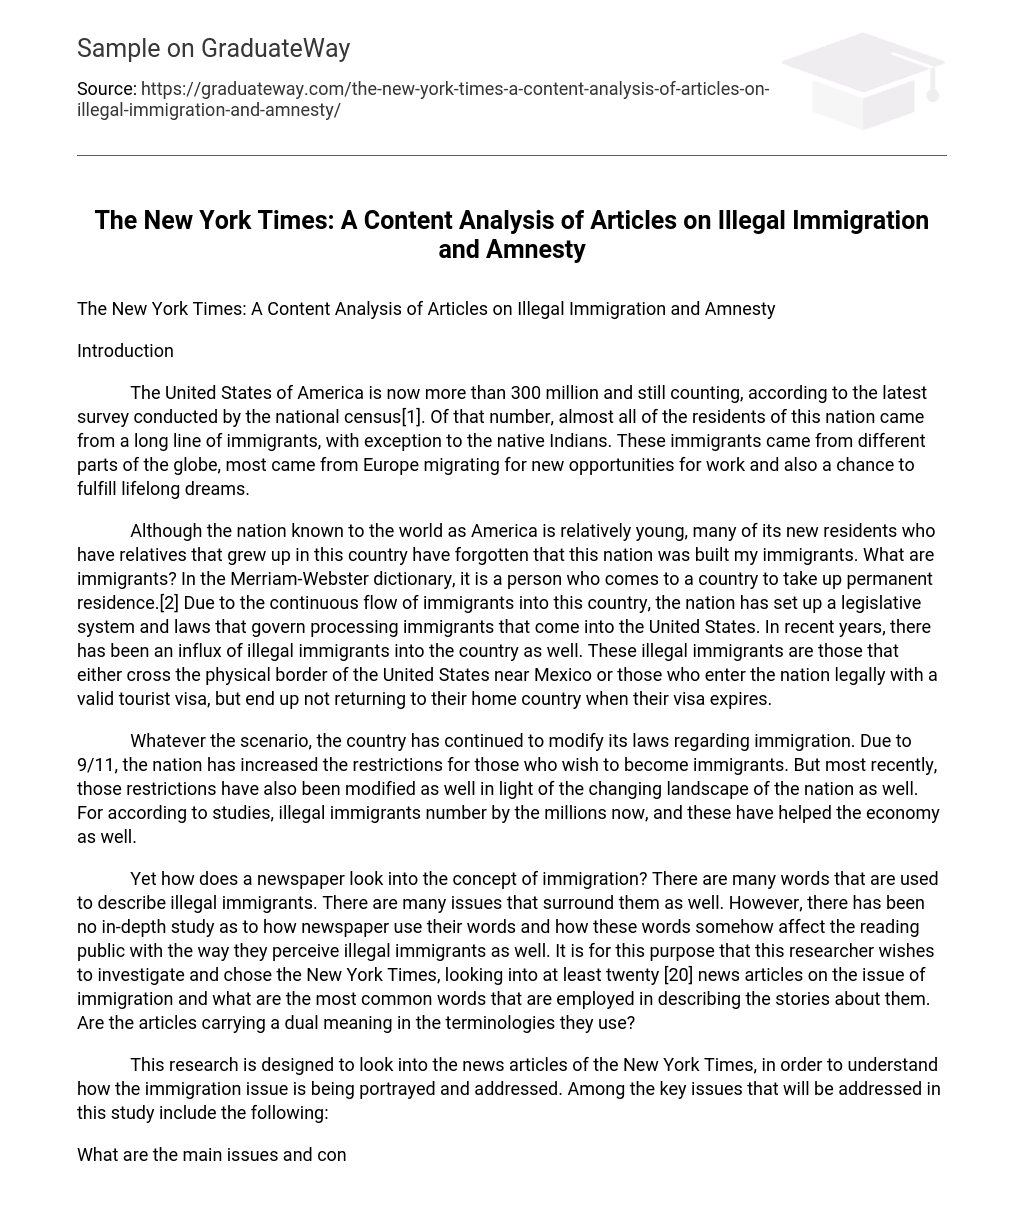 The New York Times: A Content Analysis of Articles on Illegal Immigration and Amnesty